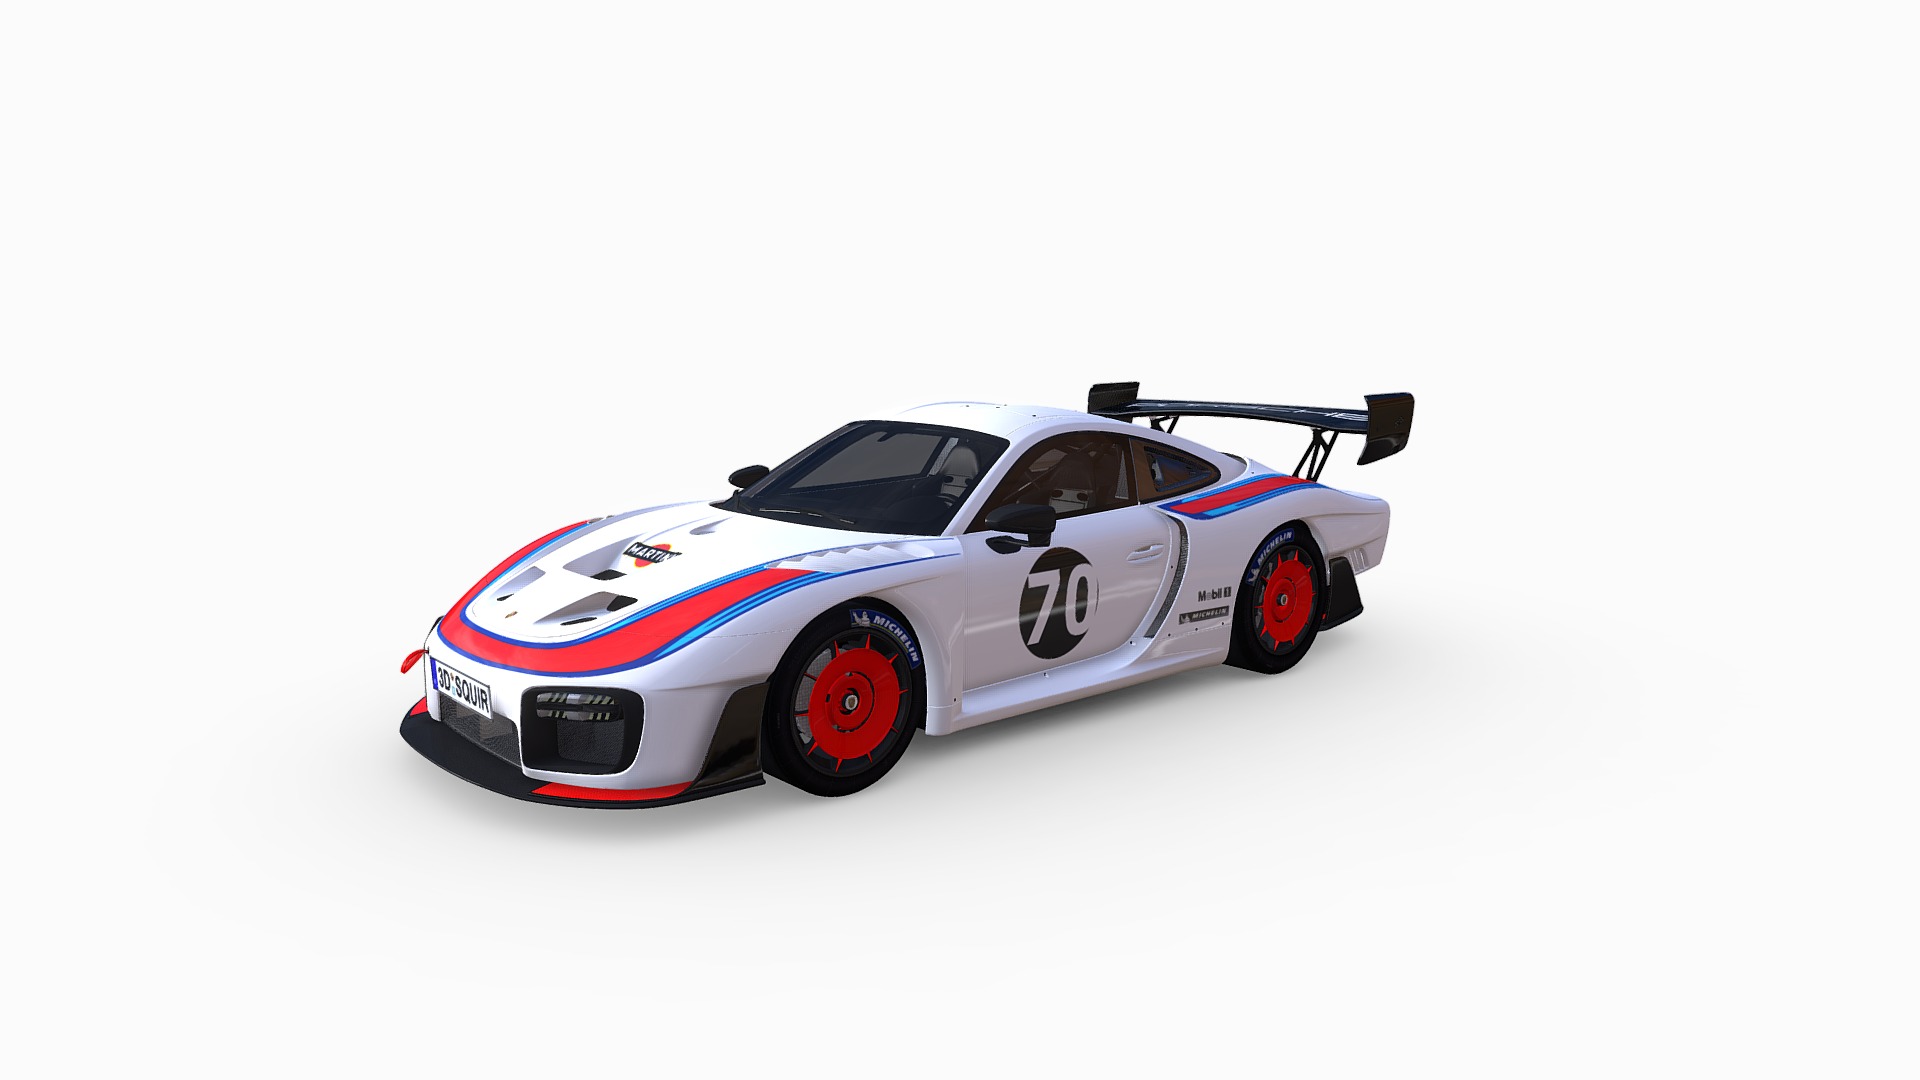 3D model Porsche 935 2019 MobyDick - This is a 3D model of the Porsche 935 2019 MobyDick. The 3D model is about a white and red race car.